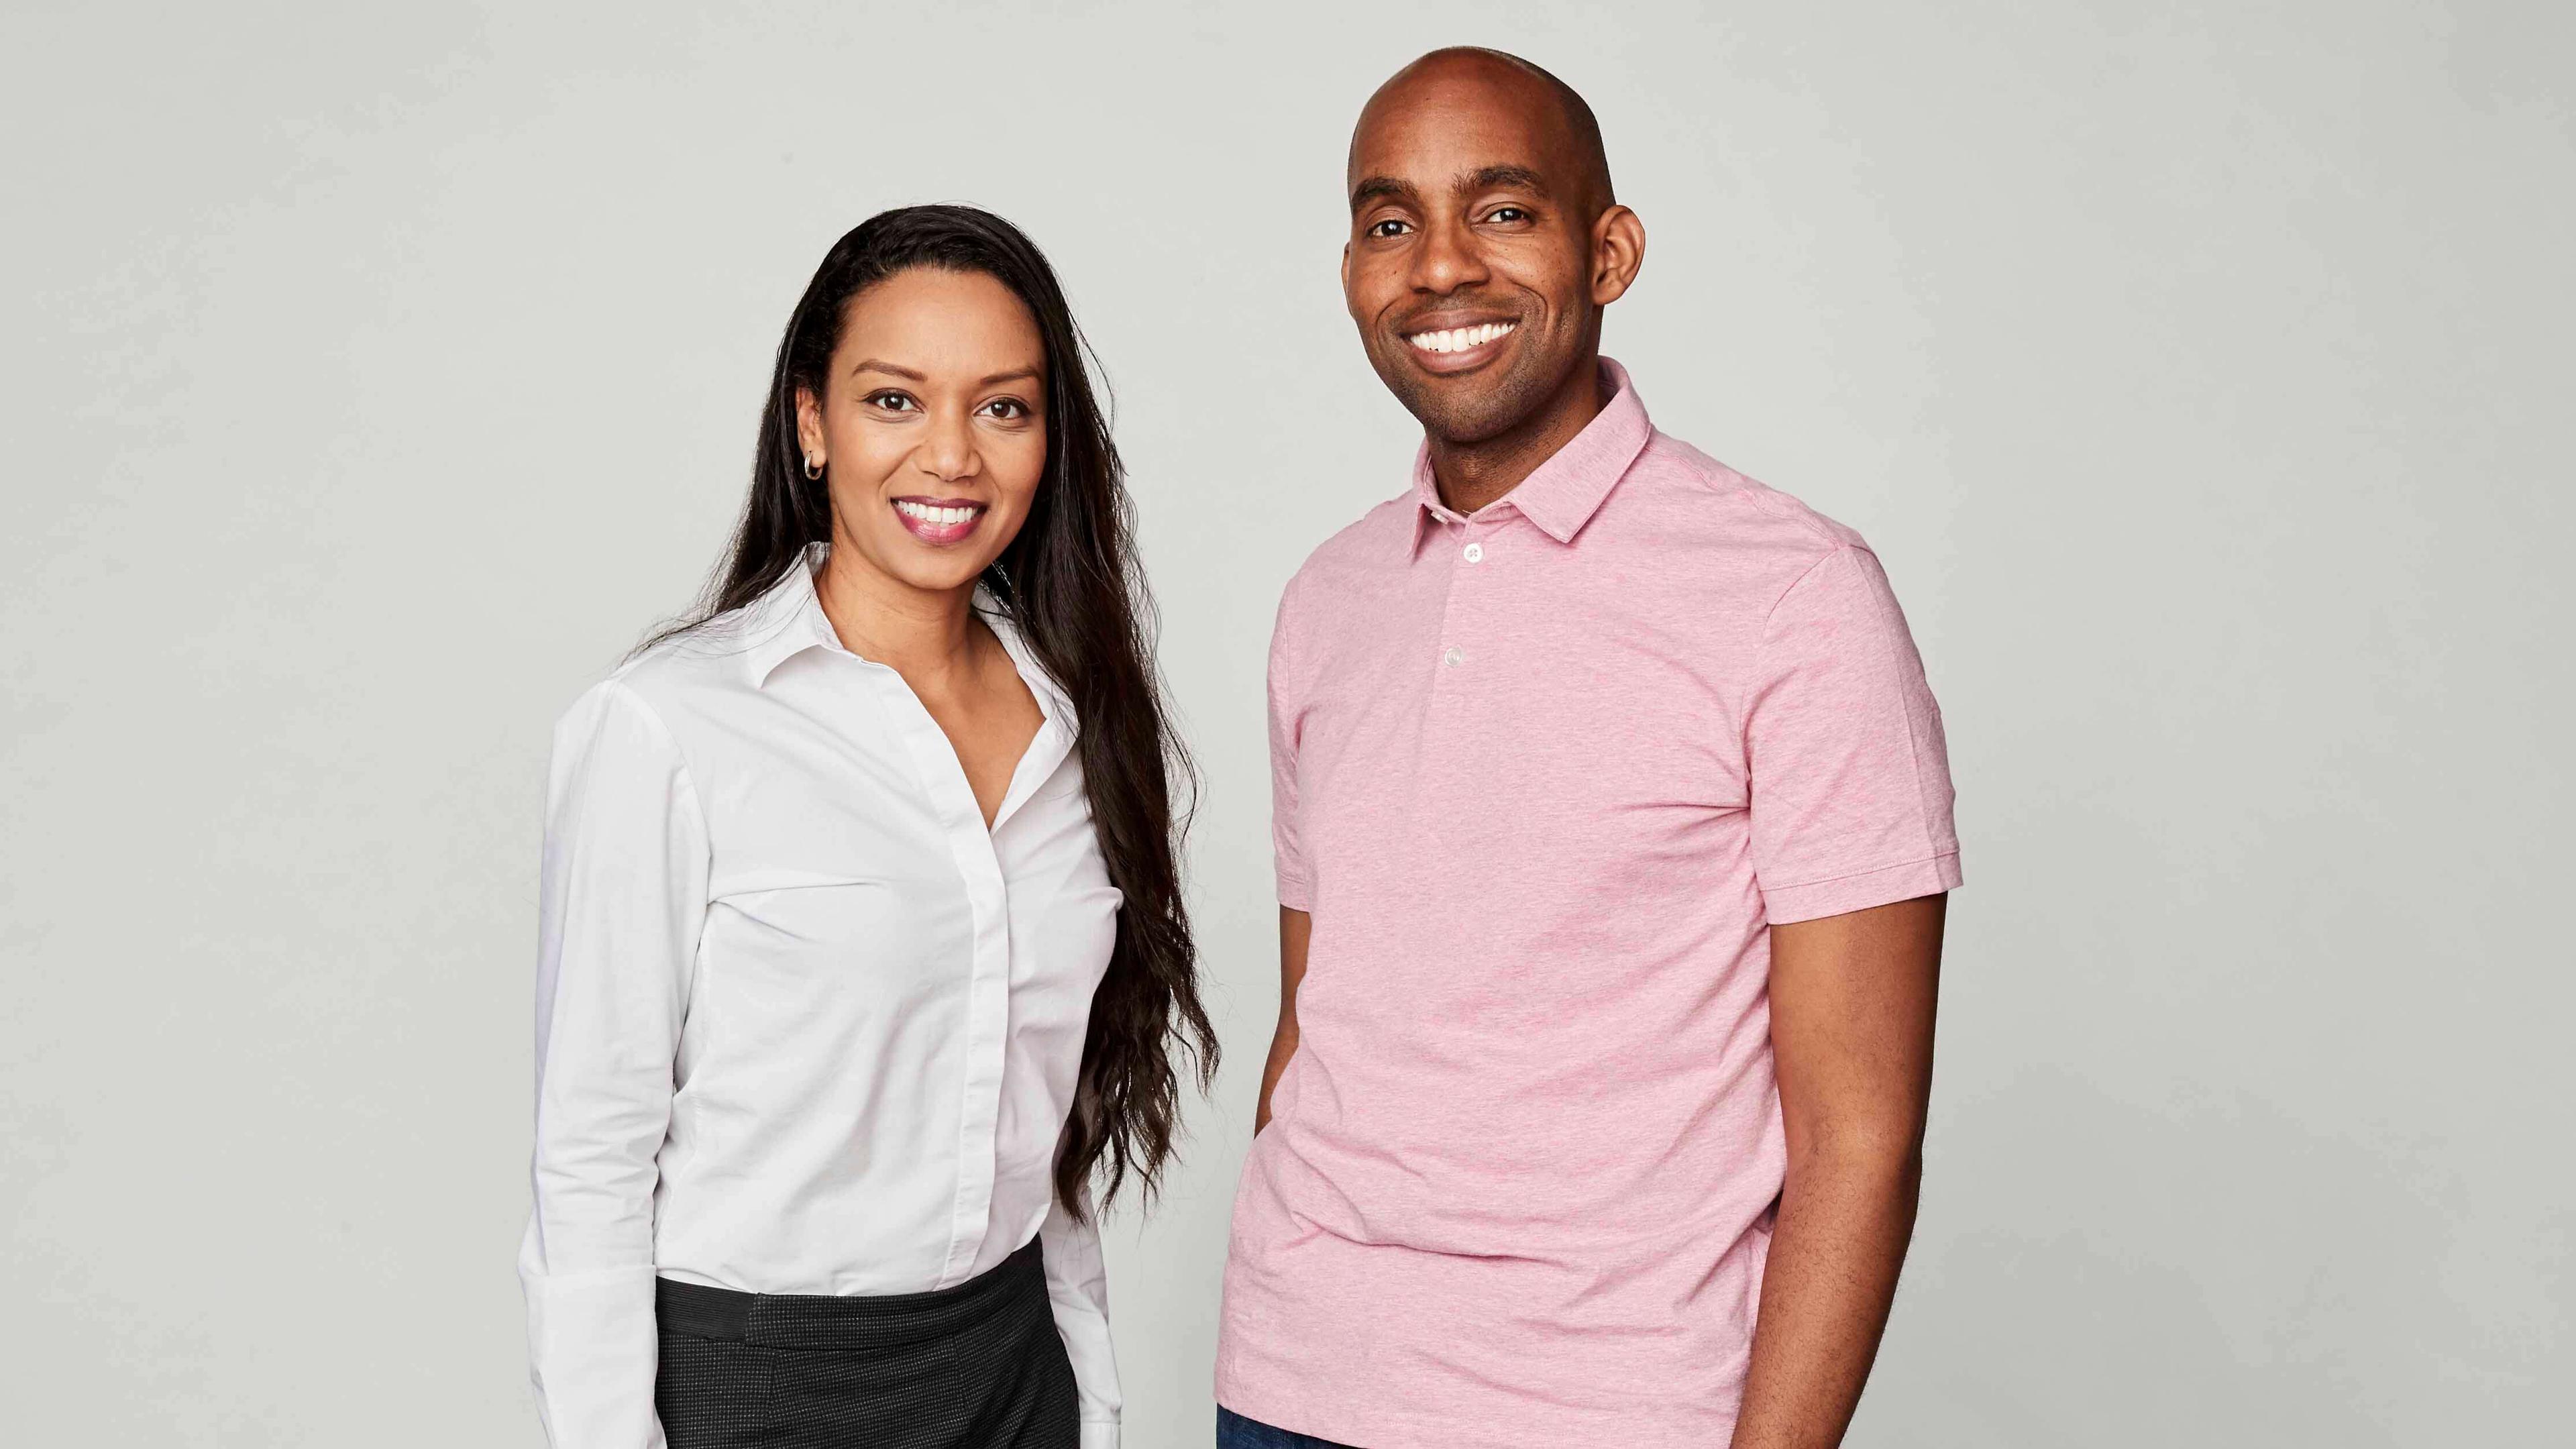 Incredible Health Co-Founders Iman Abuzeid and Rome Portlock